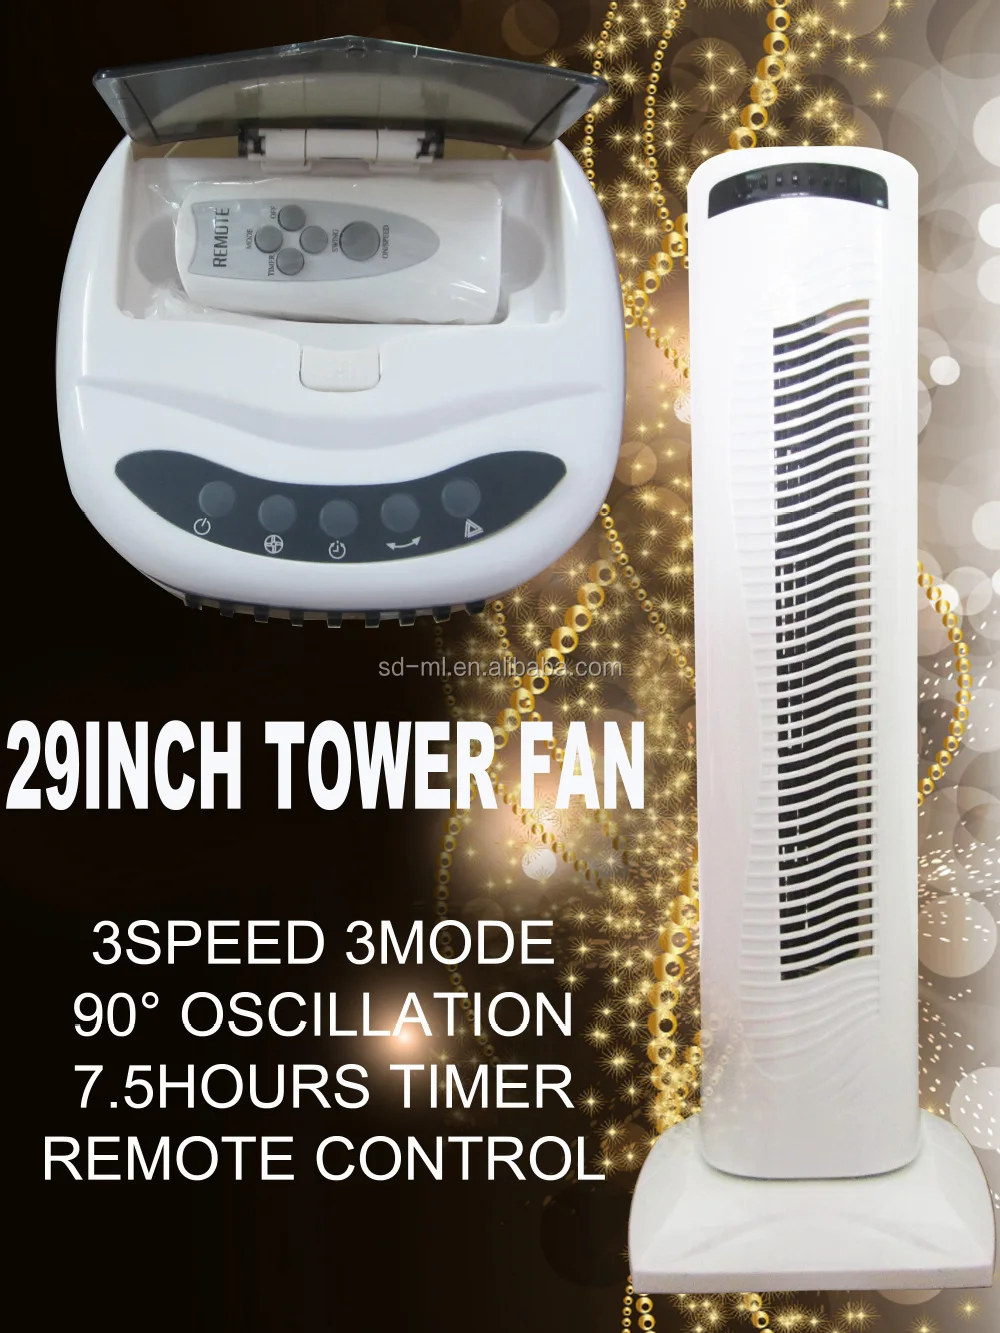 Best Household Tower Fans Buy Honeywell Quietset Whole Room Tower Fan Fan Works Remote All Kinds Of Electric Fans Product On Alibaba Com